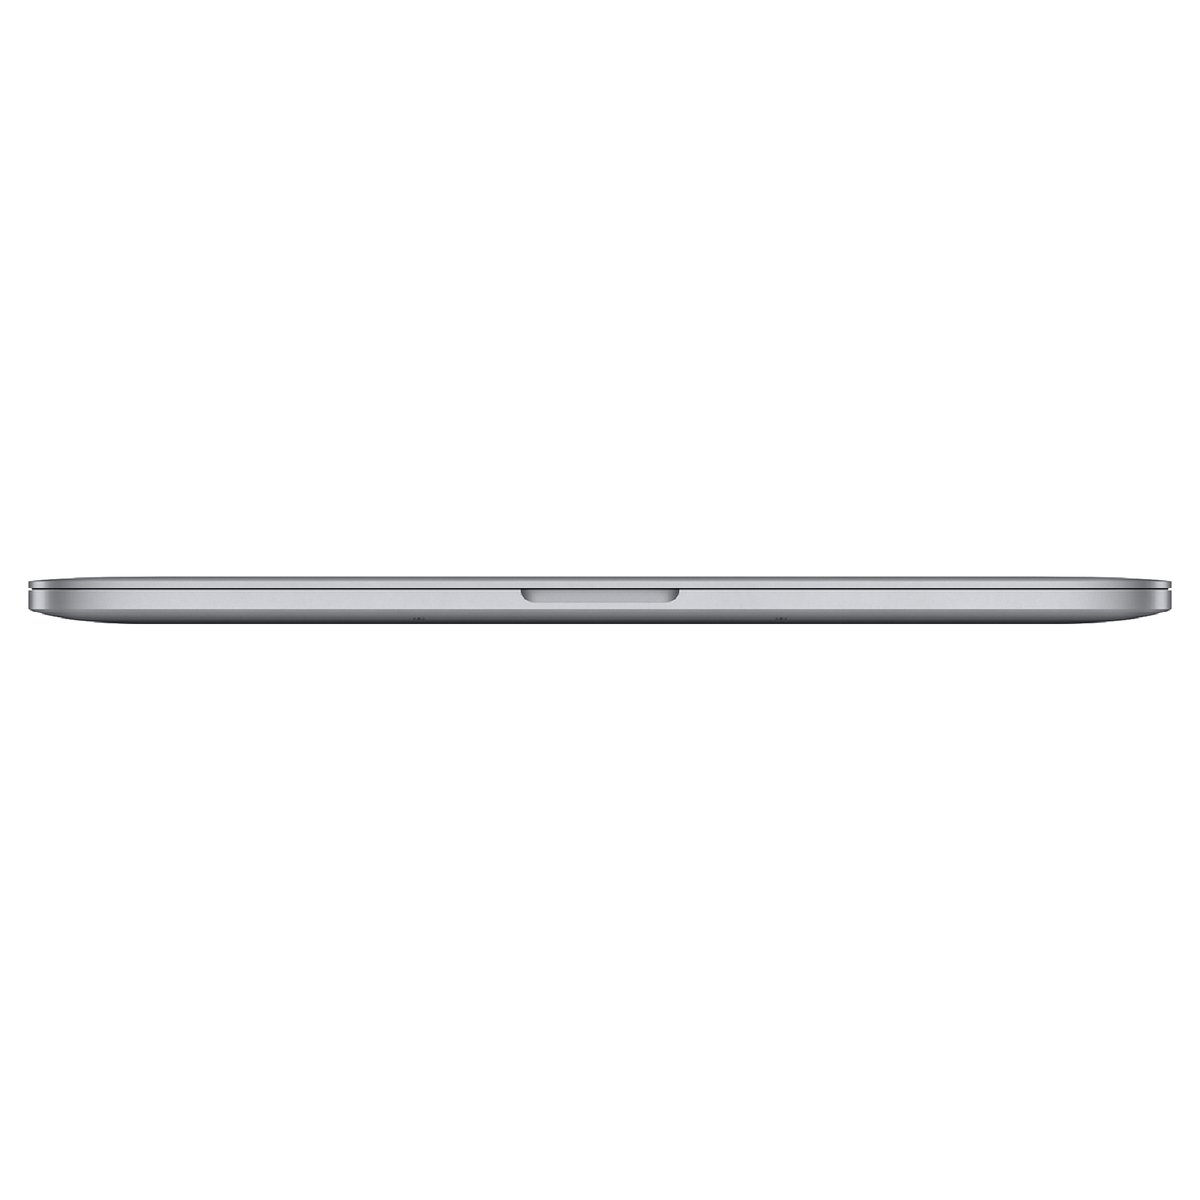 MacBook Pro Touch Bar With  16-inch,Core i7 Processor,2.6GHz 6-core,16GB RAM,512GB SSD,AMD Radeon Pro 5300M with 4GB of GDDR6 memory,Space Grey (MVVJ2AB/A)